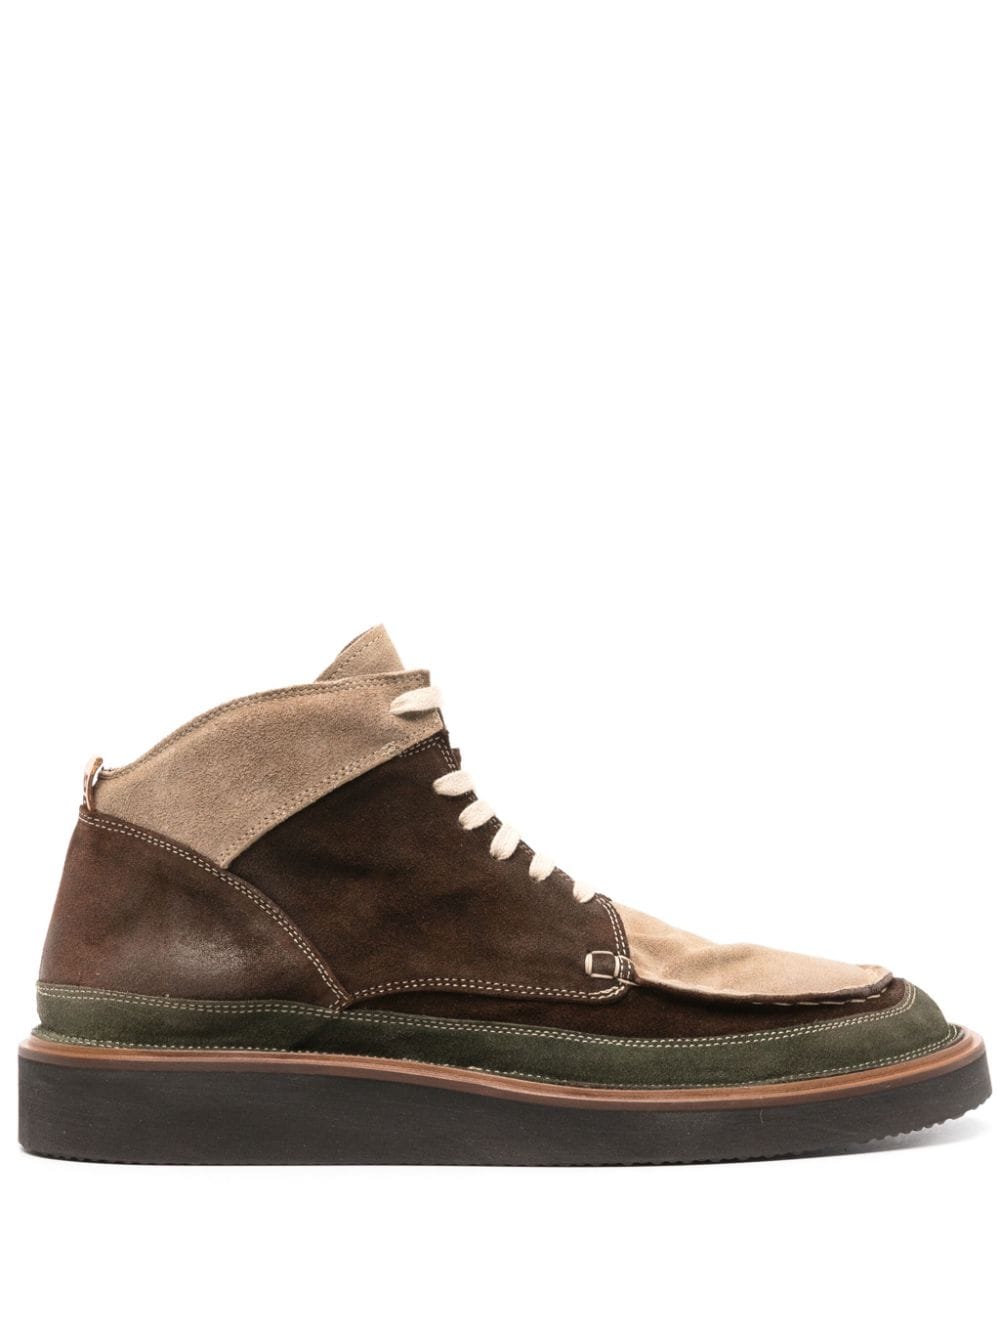 Moma Polacco lace-up suede boots - Brown von Moma